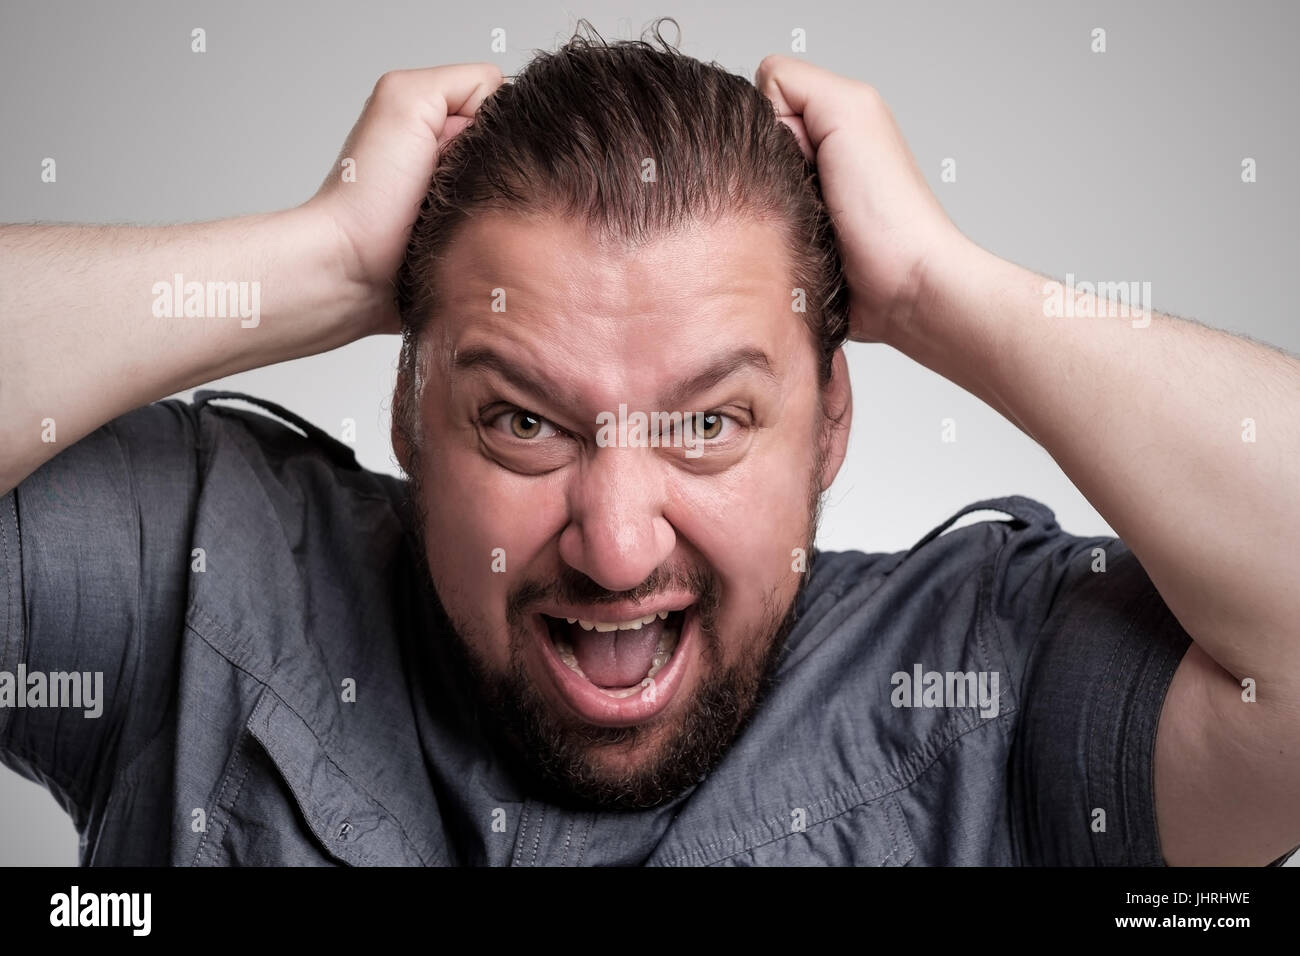 Closeup portrait of angry, frustrated man, pulling his hair out. Negative human emotions and facial expressions Stock Photo